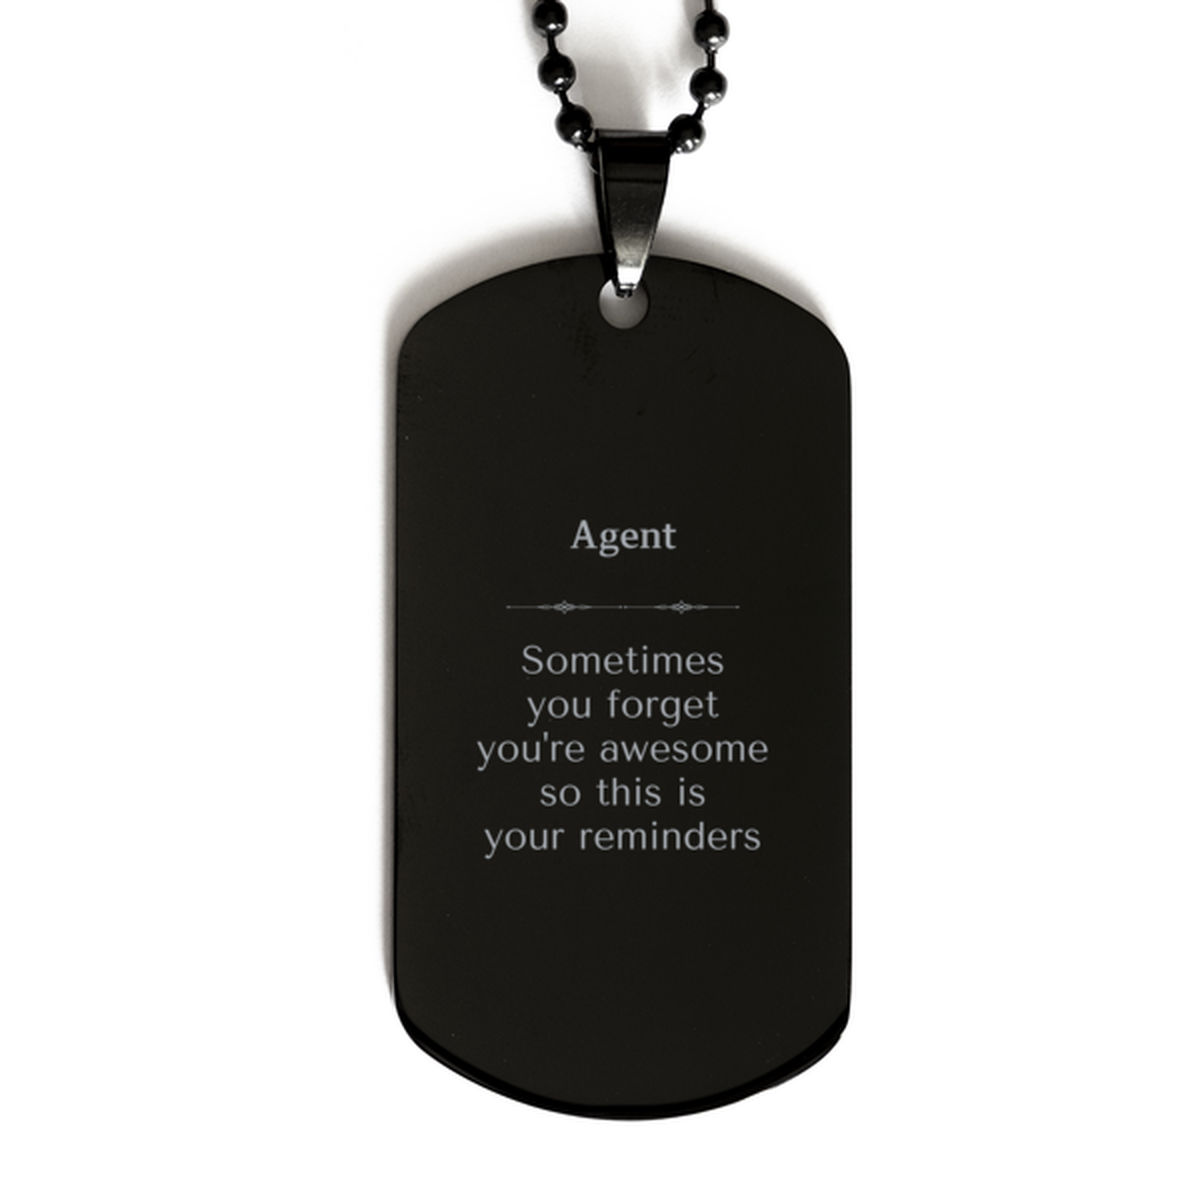 Sentimental Agent Black Dog Tag, Agent Sometimes you forget you're awesome so this is your reminders, Graduation Christmas Birthday Gifts for Agent, Men, Women, Coworkers